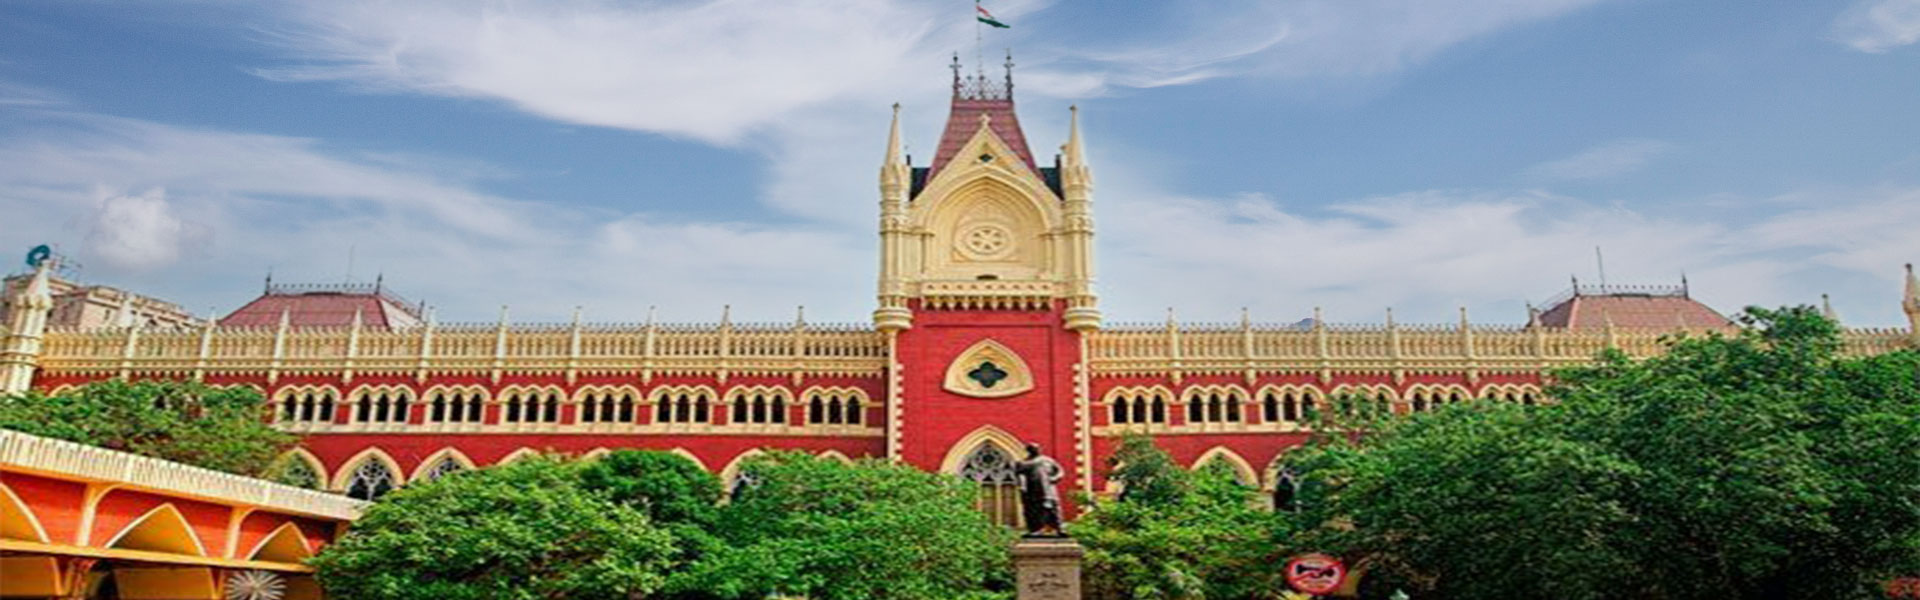 The House of Justice Kolkata High Court India